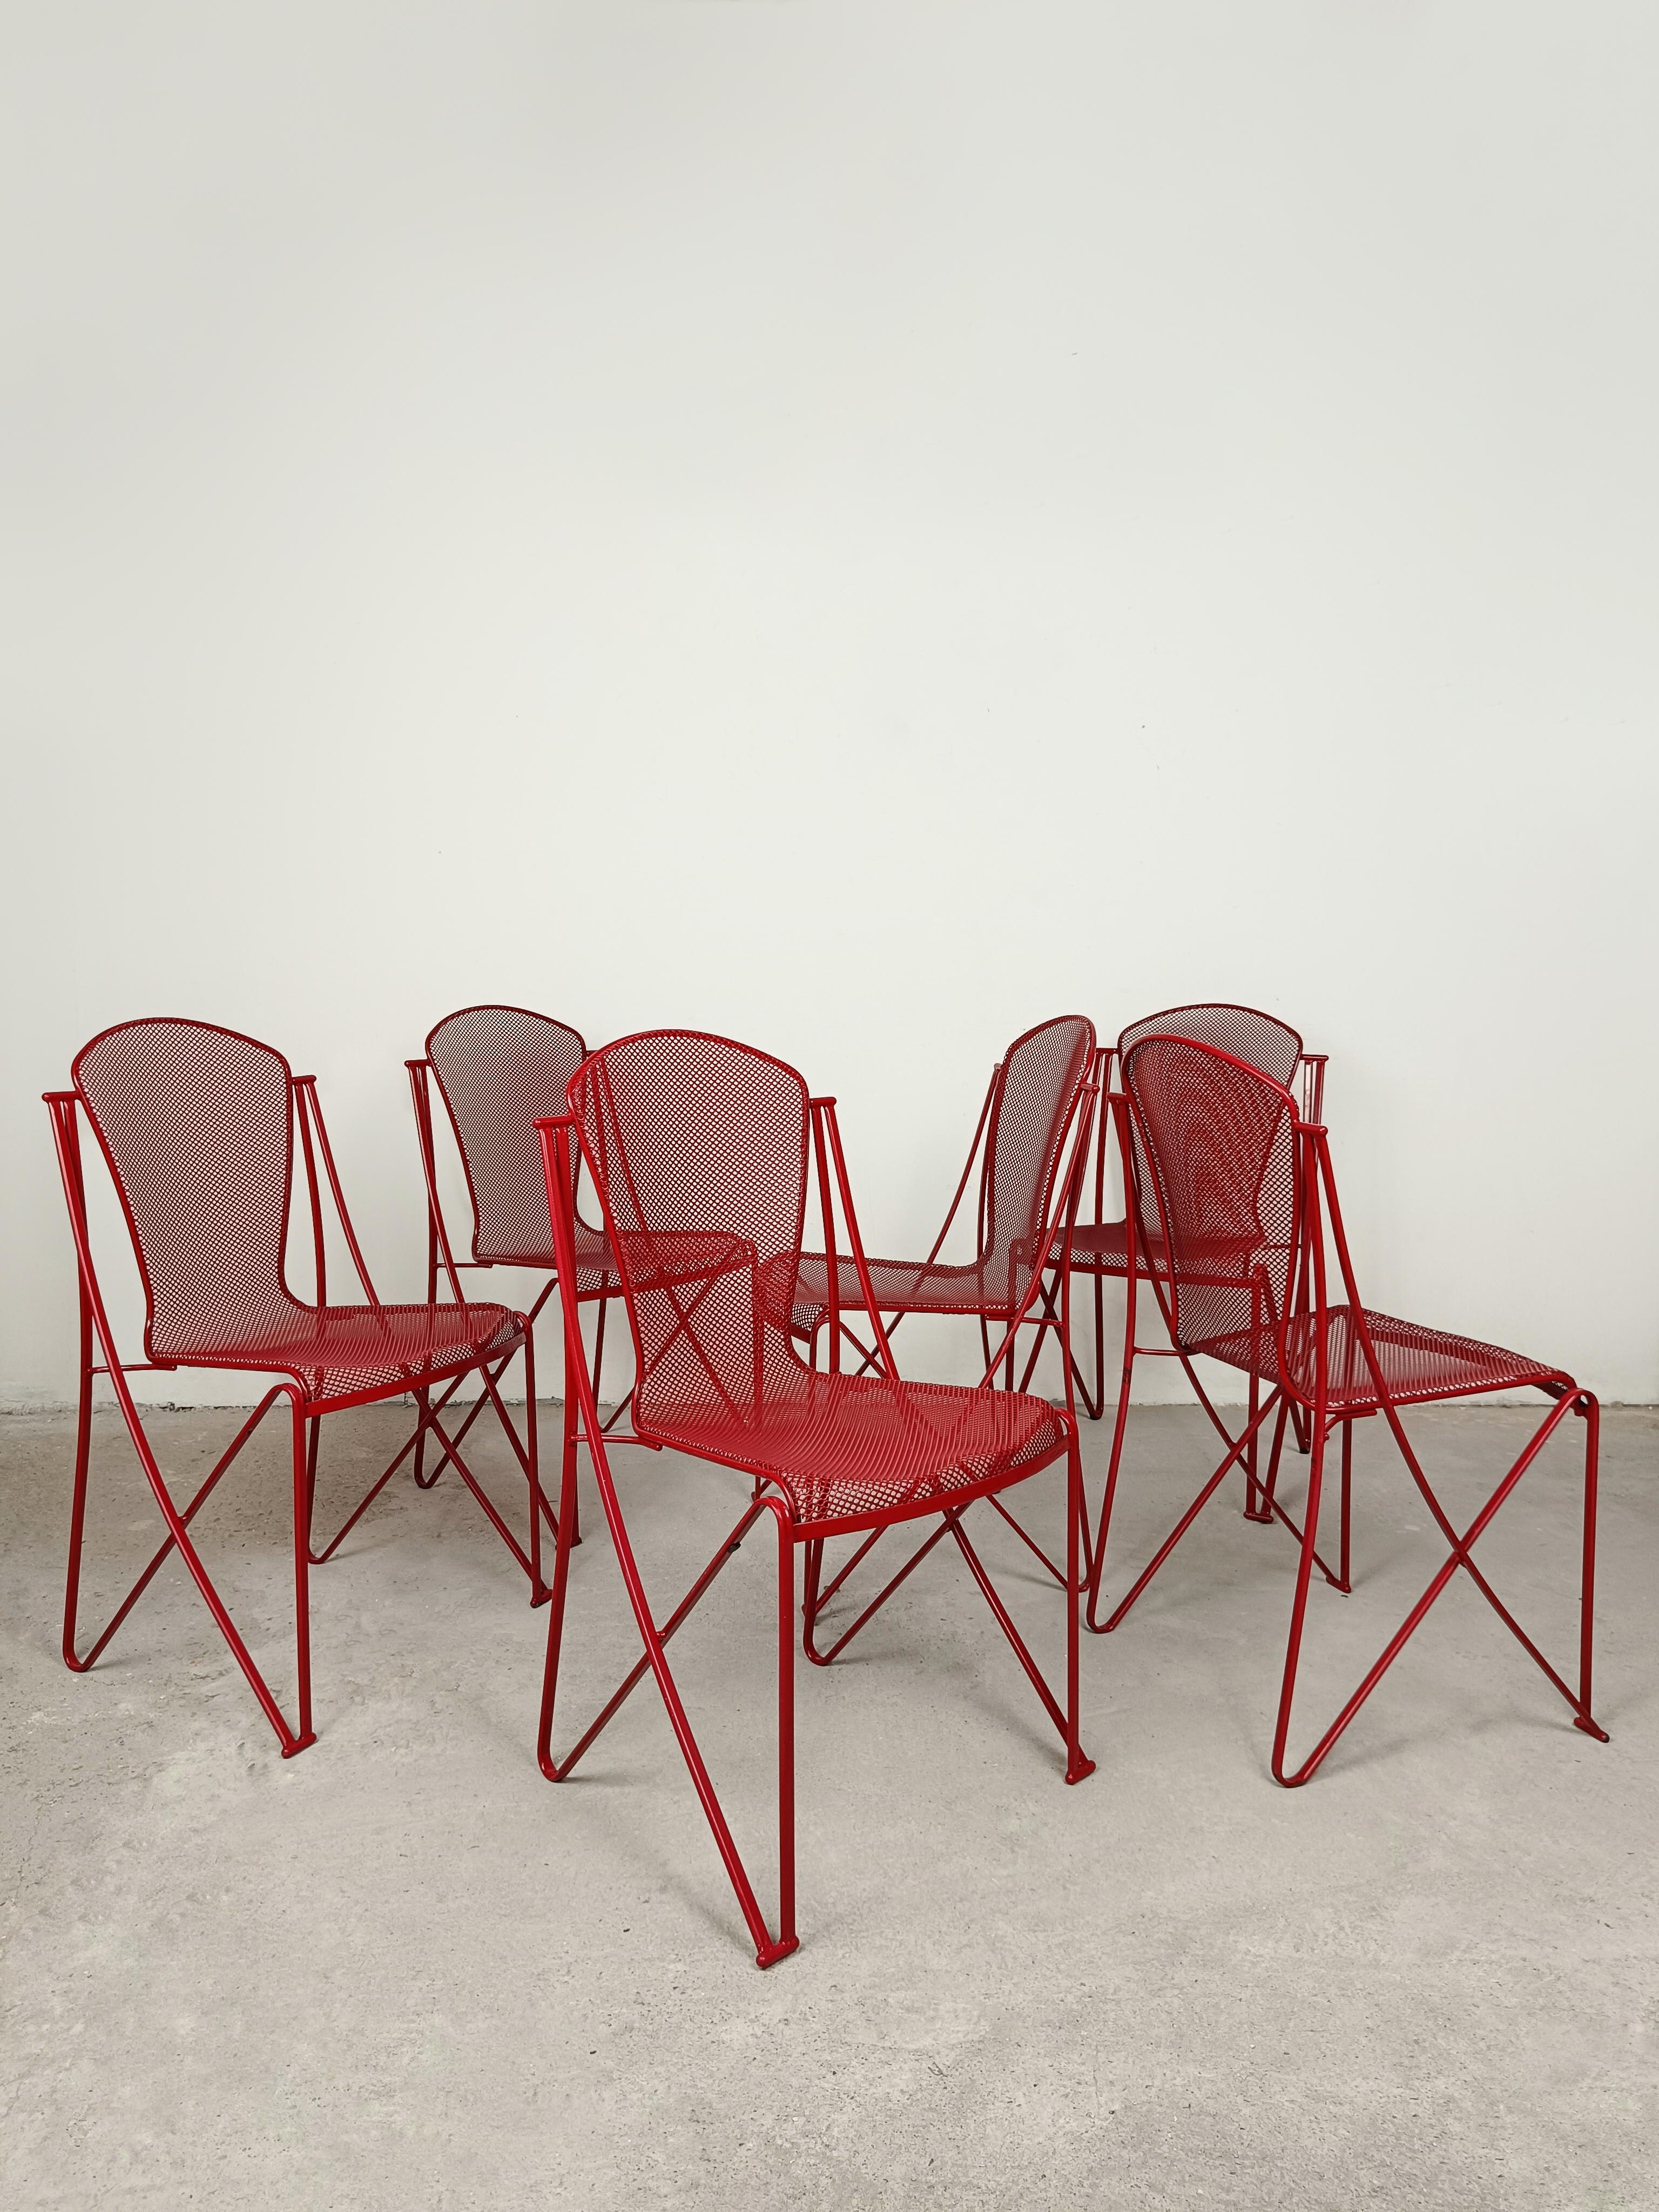 Steel Postmodern Outdoor Chairs designed by Oscar Tusquets Blanca for Aleph-Driade  For Sale